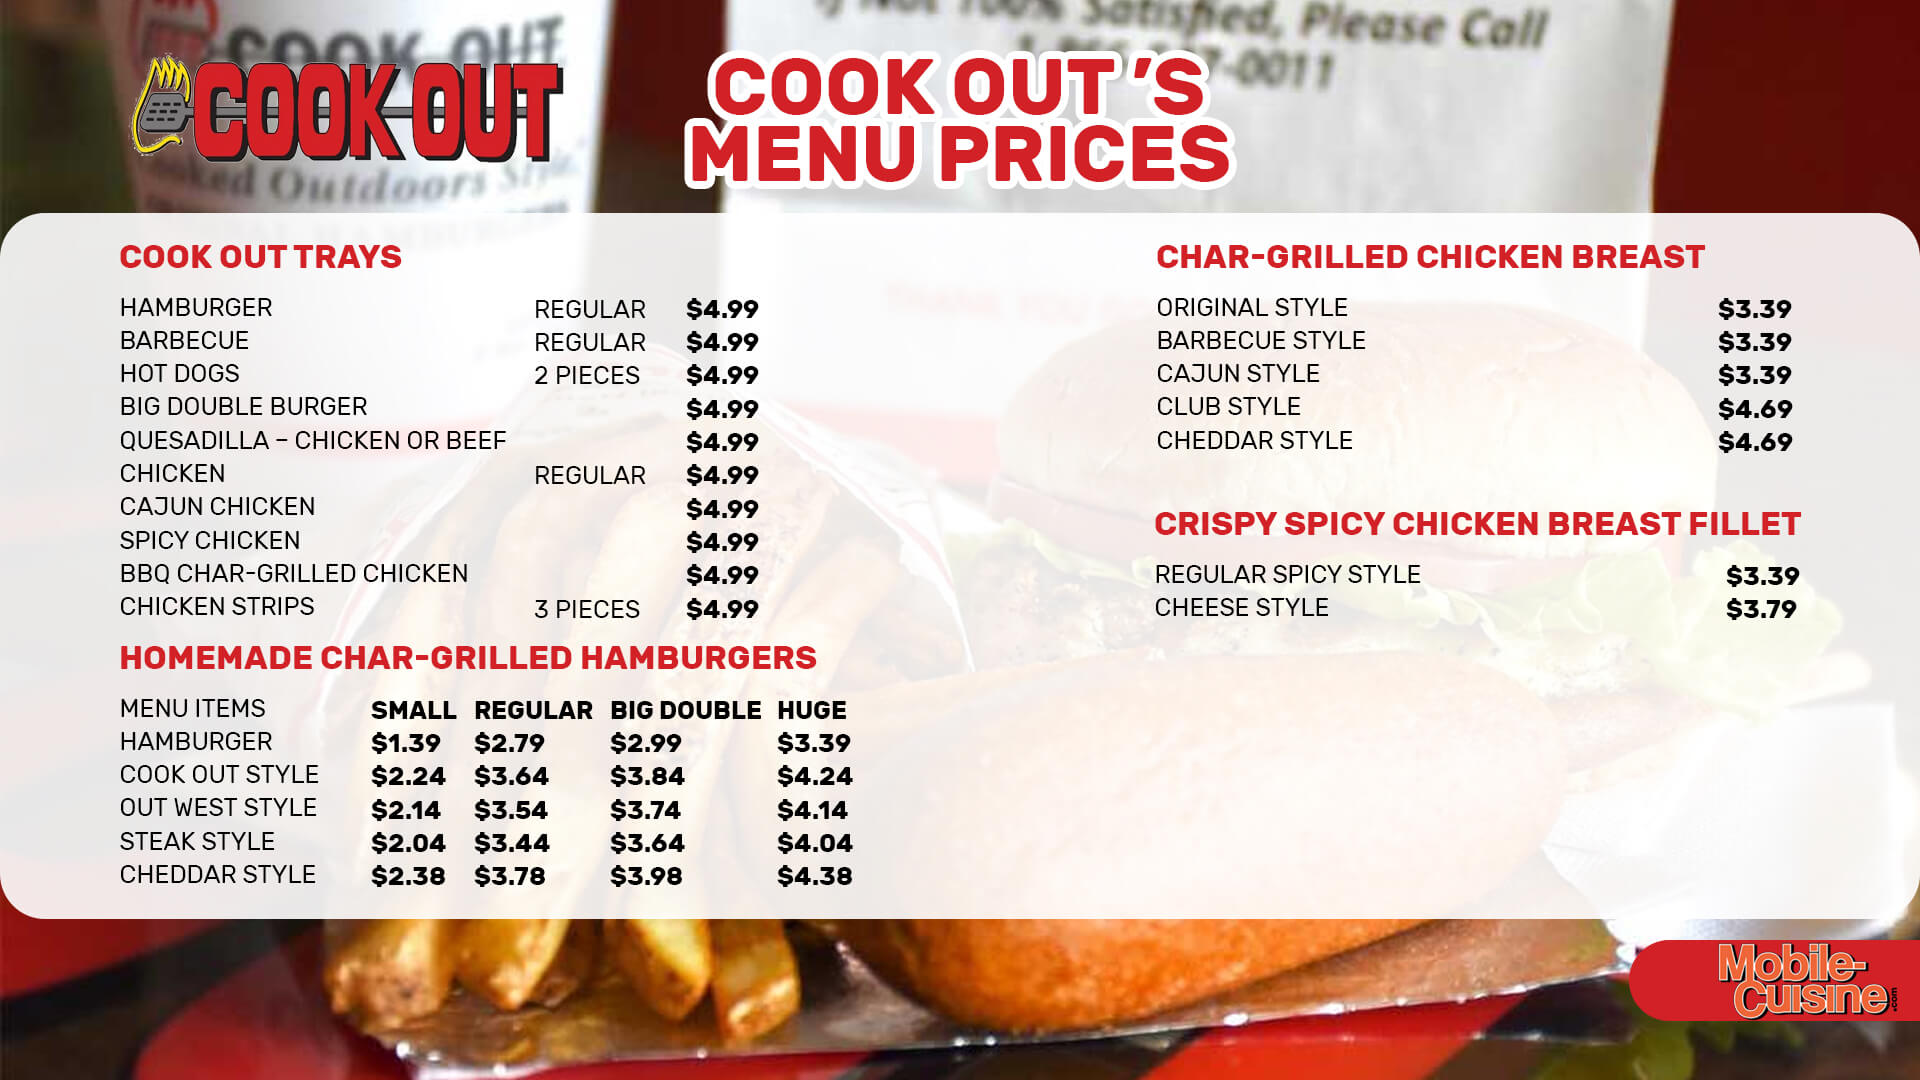 Cook Out menu prices